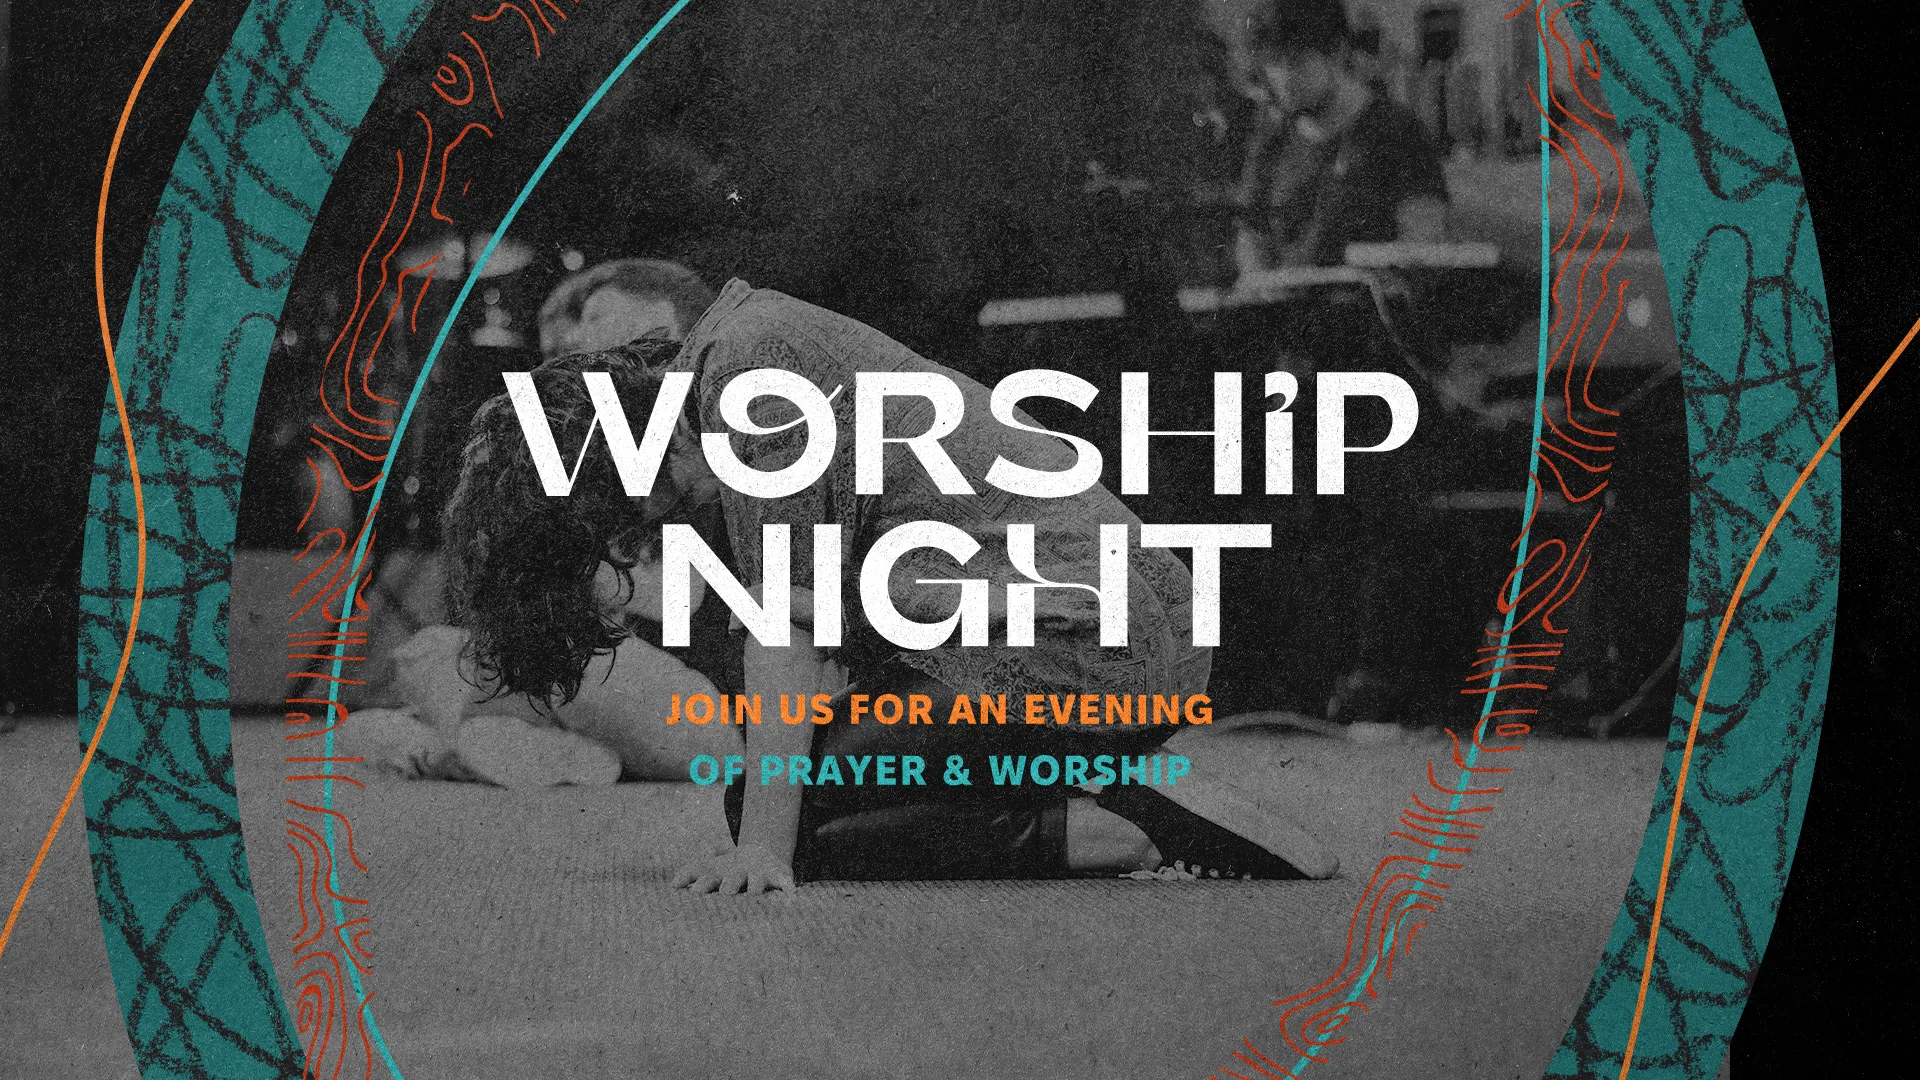 Set A Contemplative Mood With This 'Worship Night' Graphic, Inviting The Community For An Evening Filled With Prayer And Heartfelt Worship. The Soulful Image Combined With Earthy Textures And Warm Tones Creates A Welcoming Call To Worship, Reflection, And Spiritual Connection.